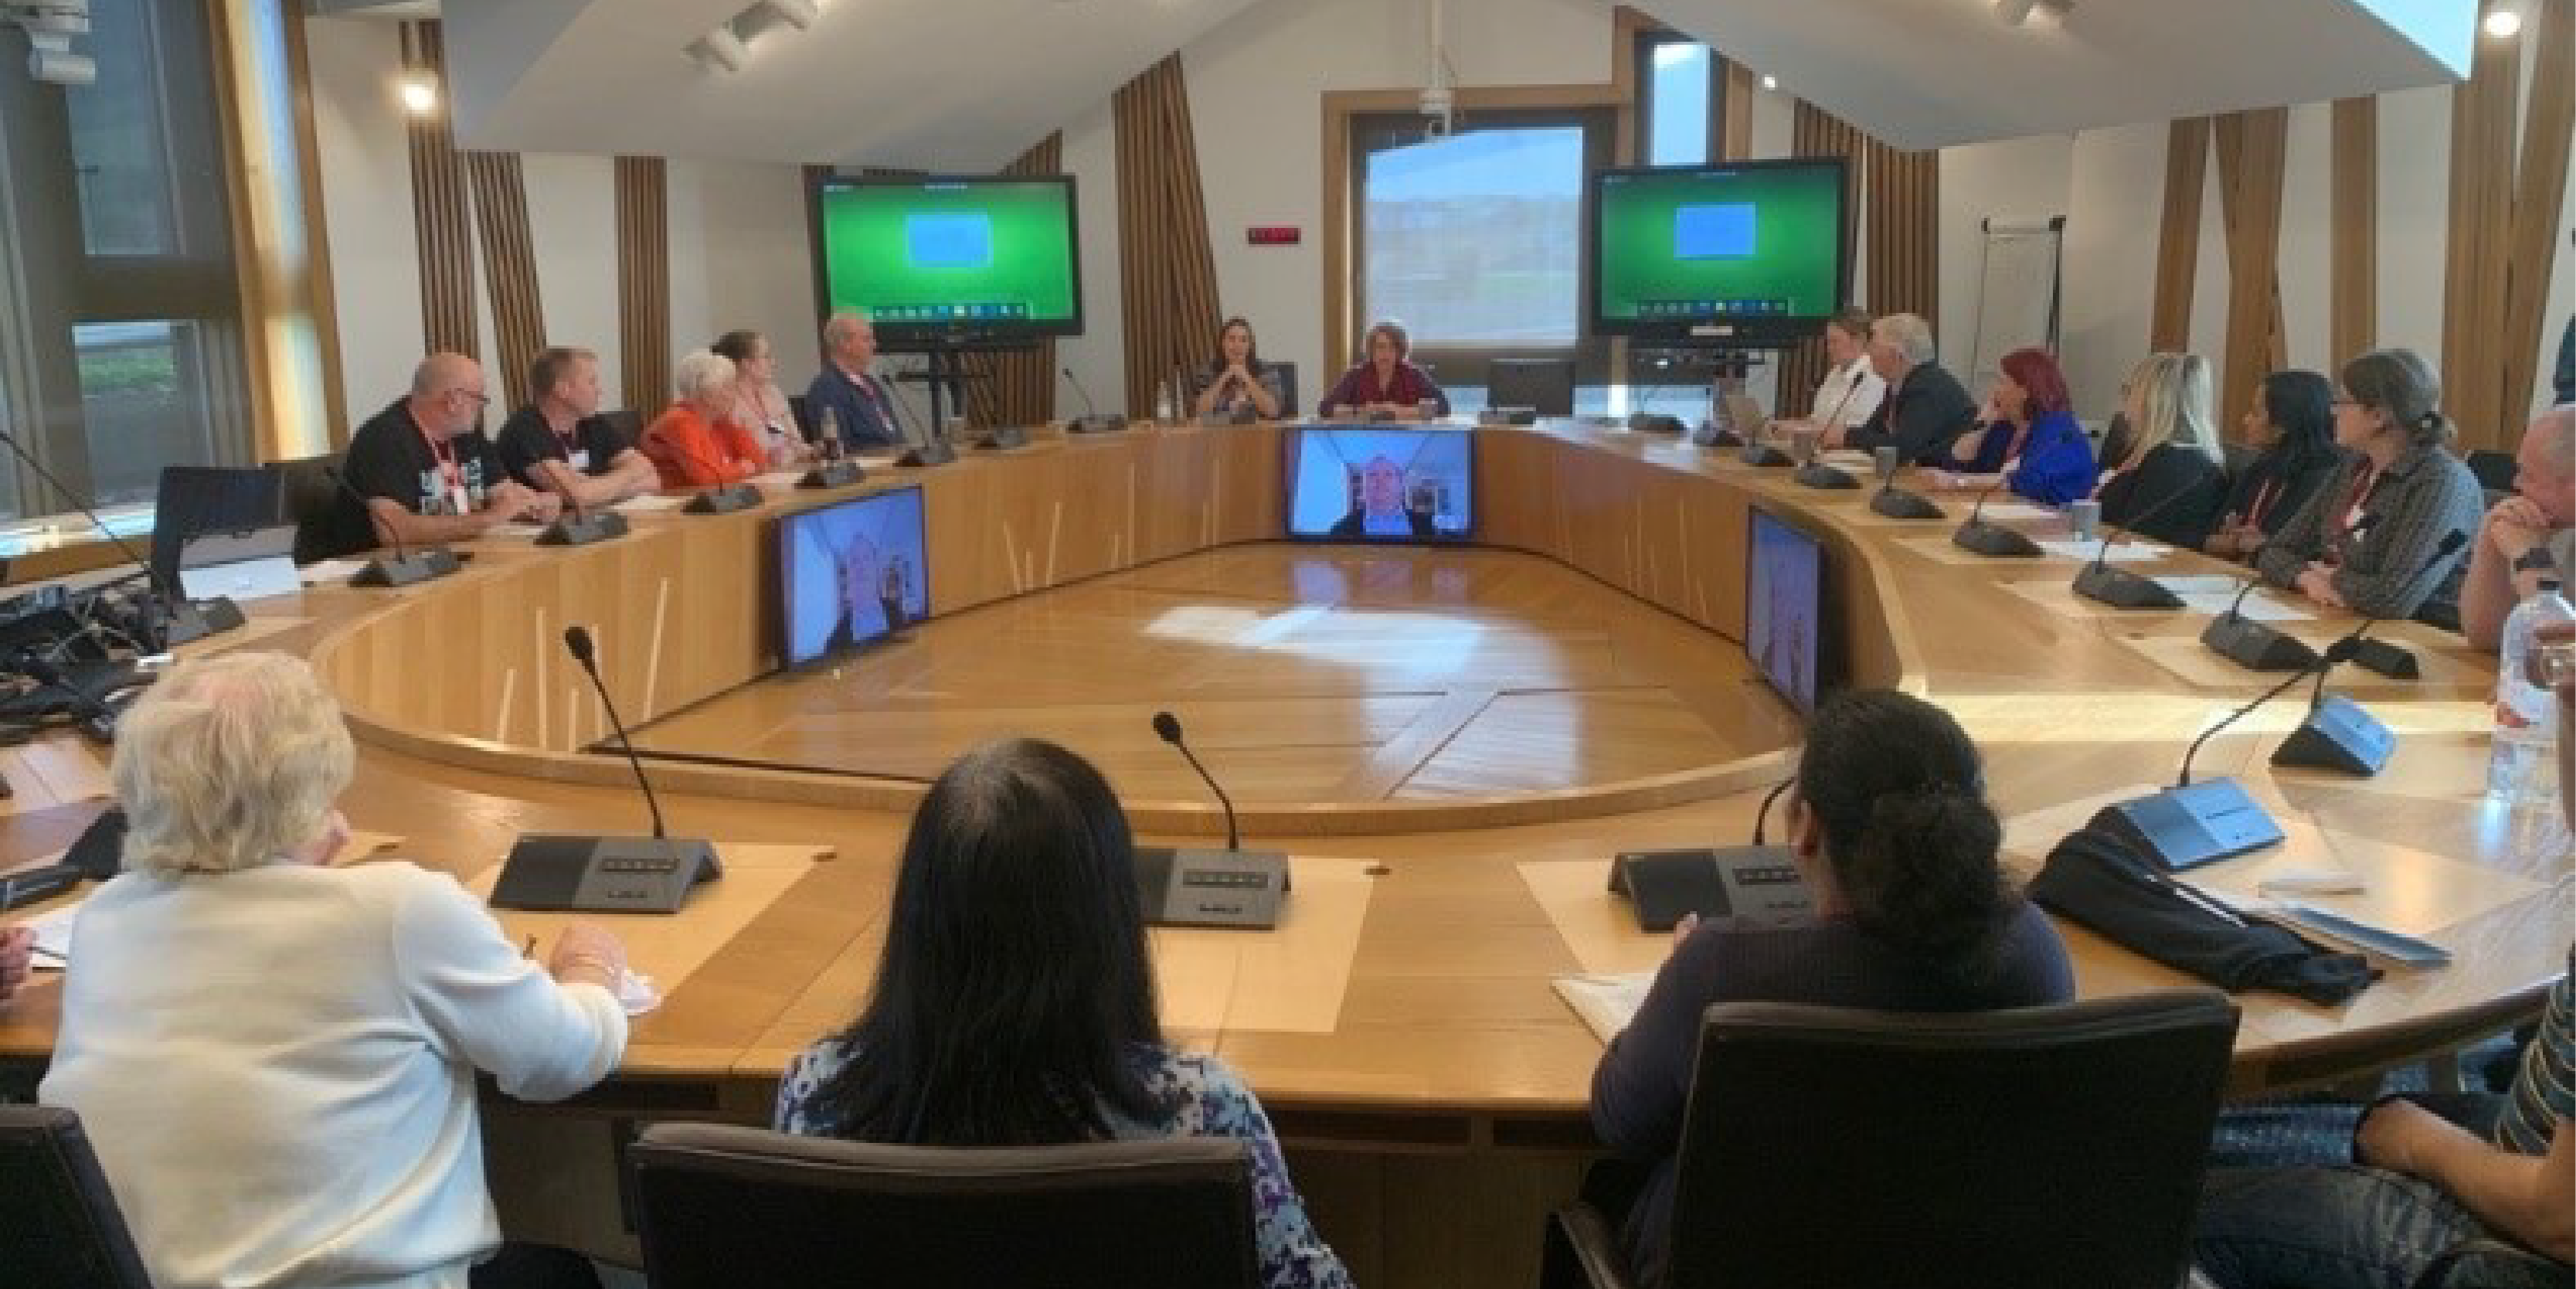 Image of Citizens' Panel members sitting around a Committee room table putting questions to witnesses who are sitting at the far end of the table.